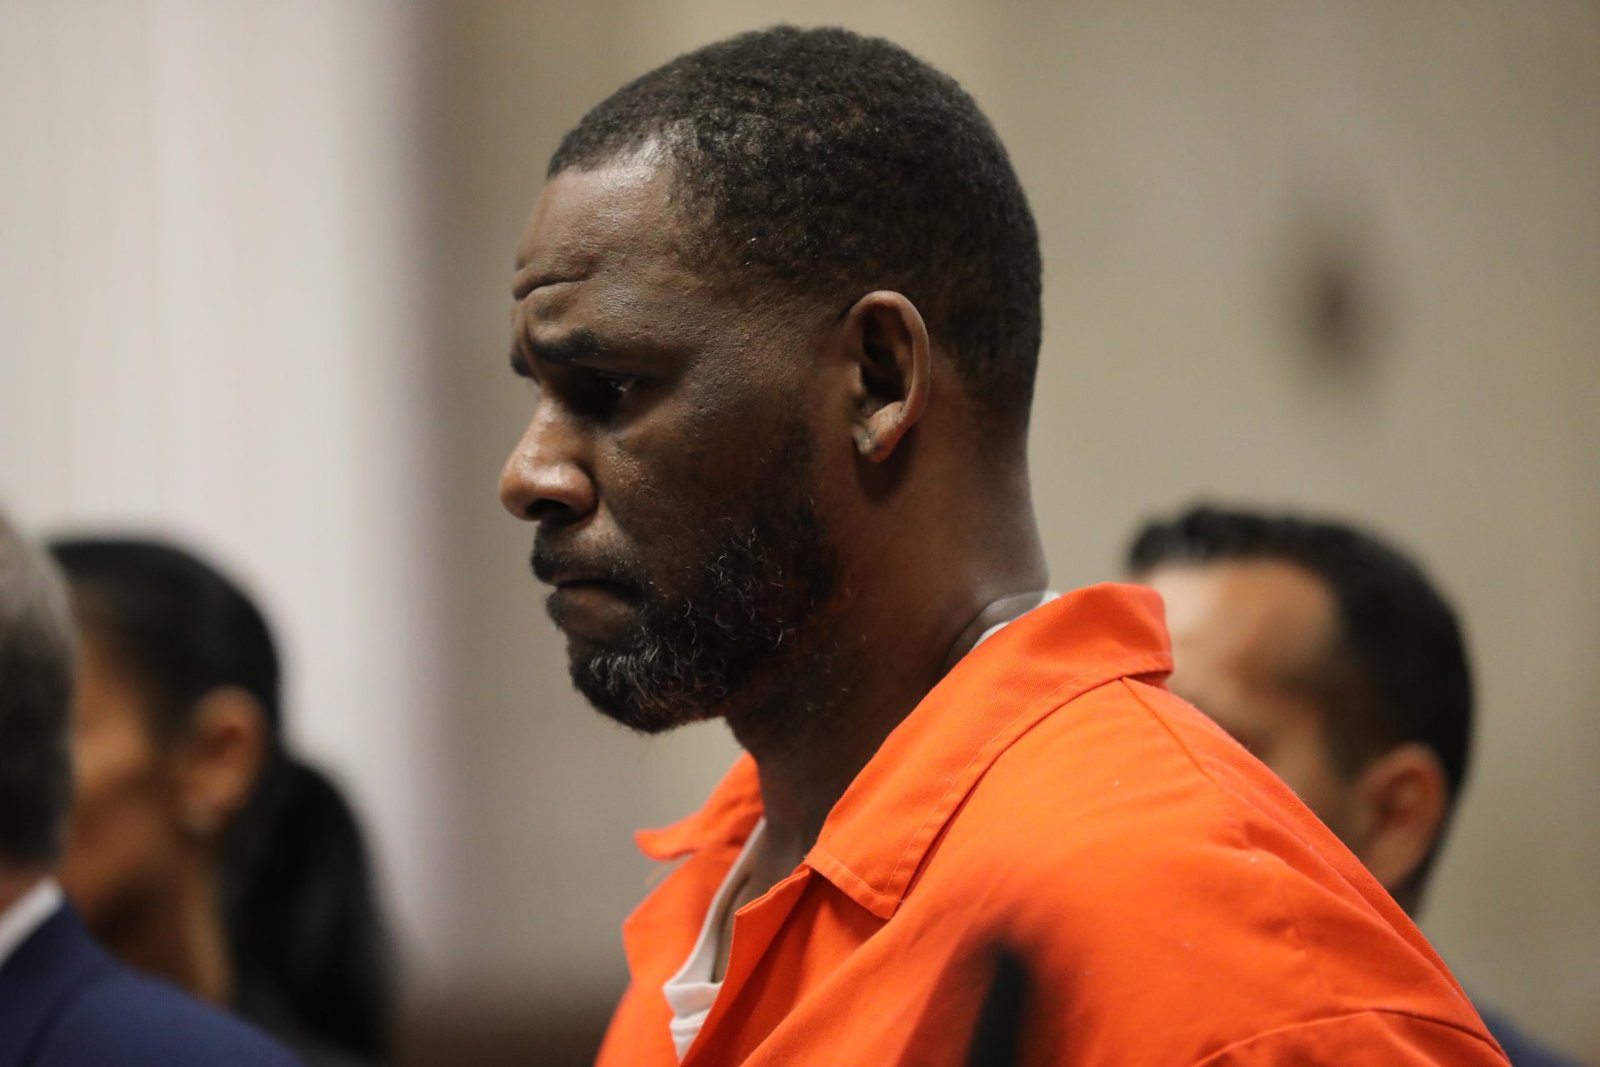 R. Kelly Ordered To Absorb Sexual Disorder Treatment & No Contact With Minors Following His Open From Reformatory